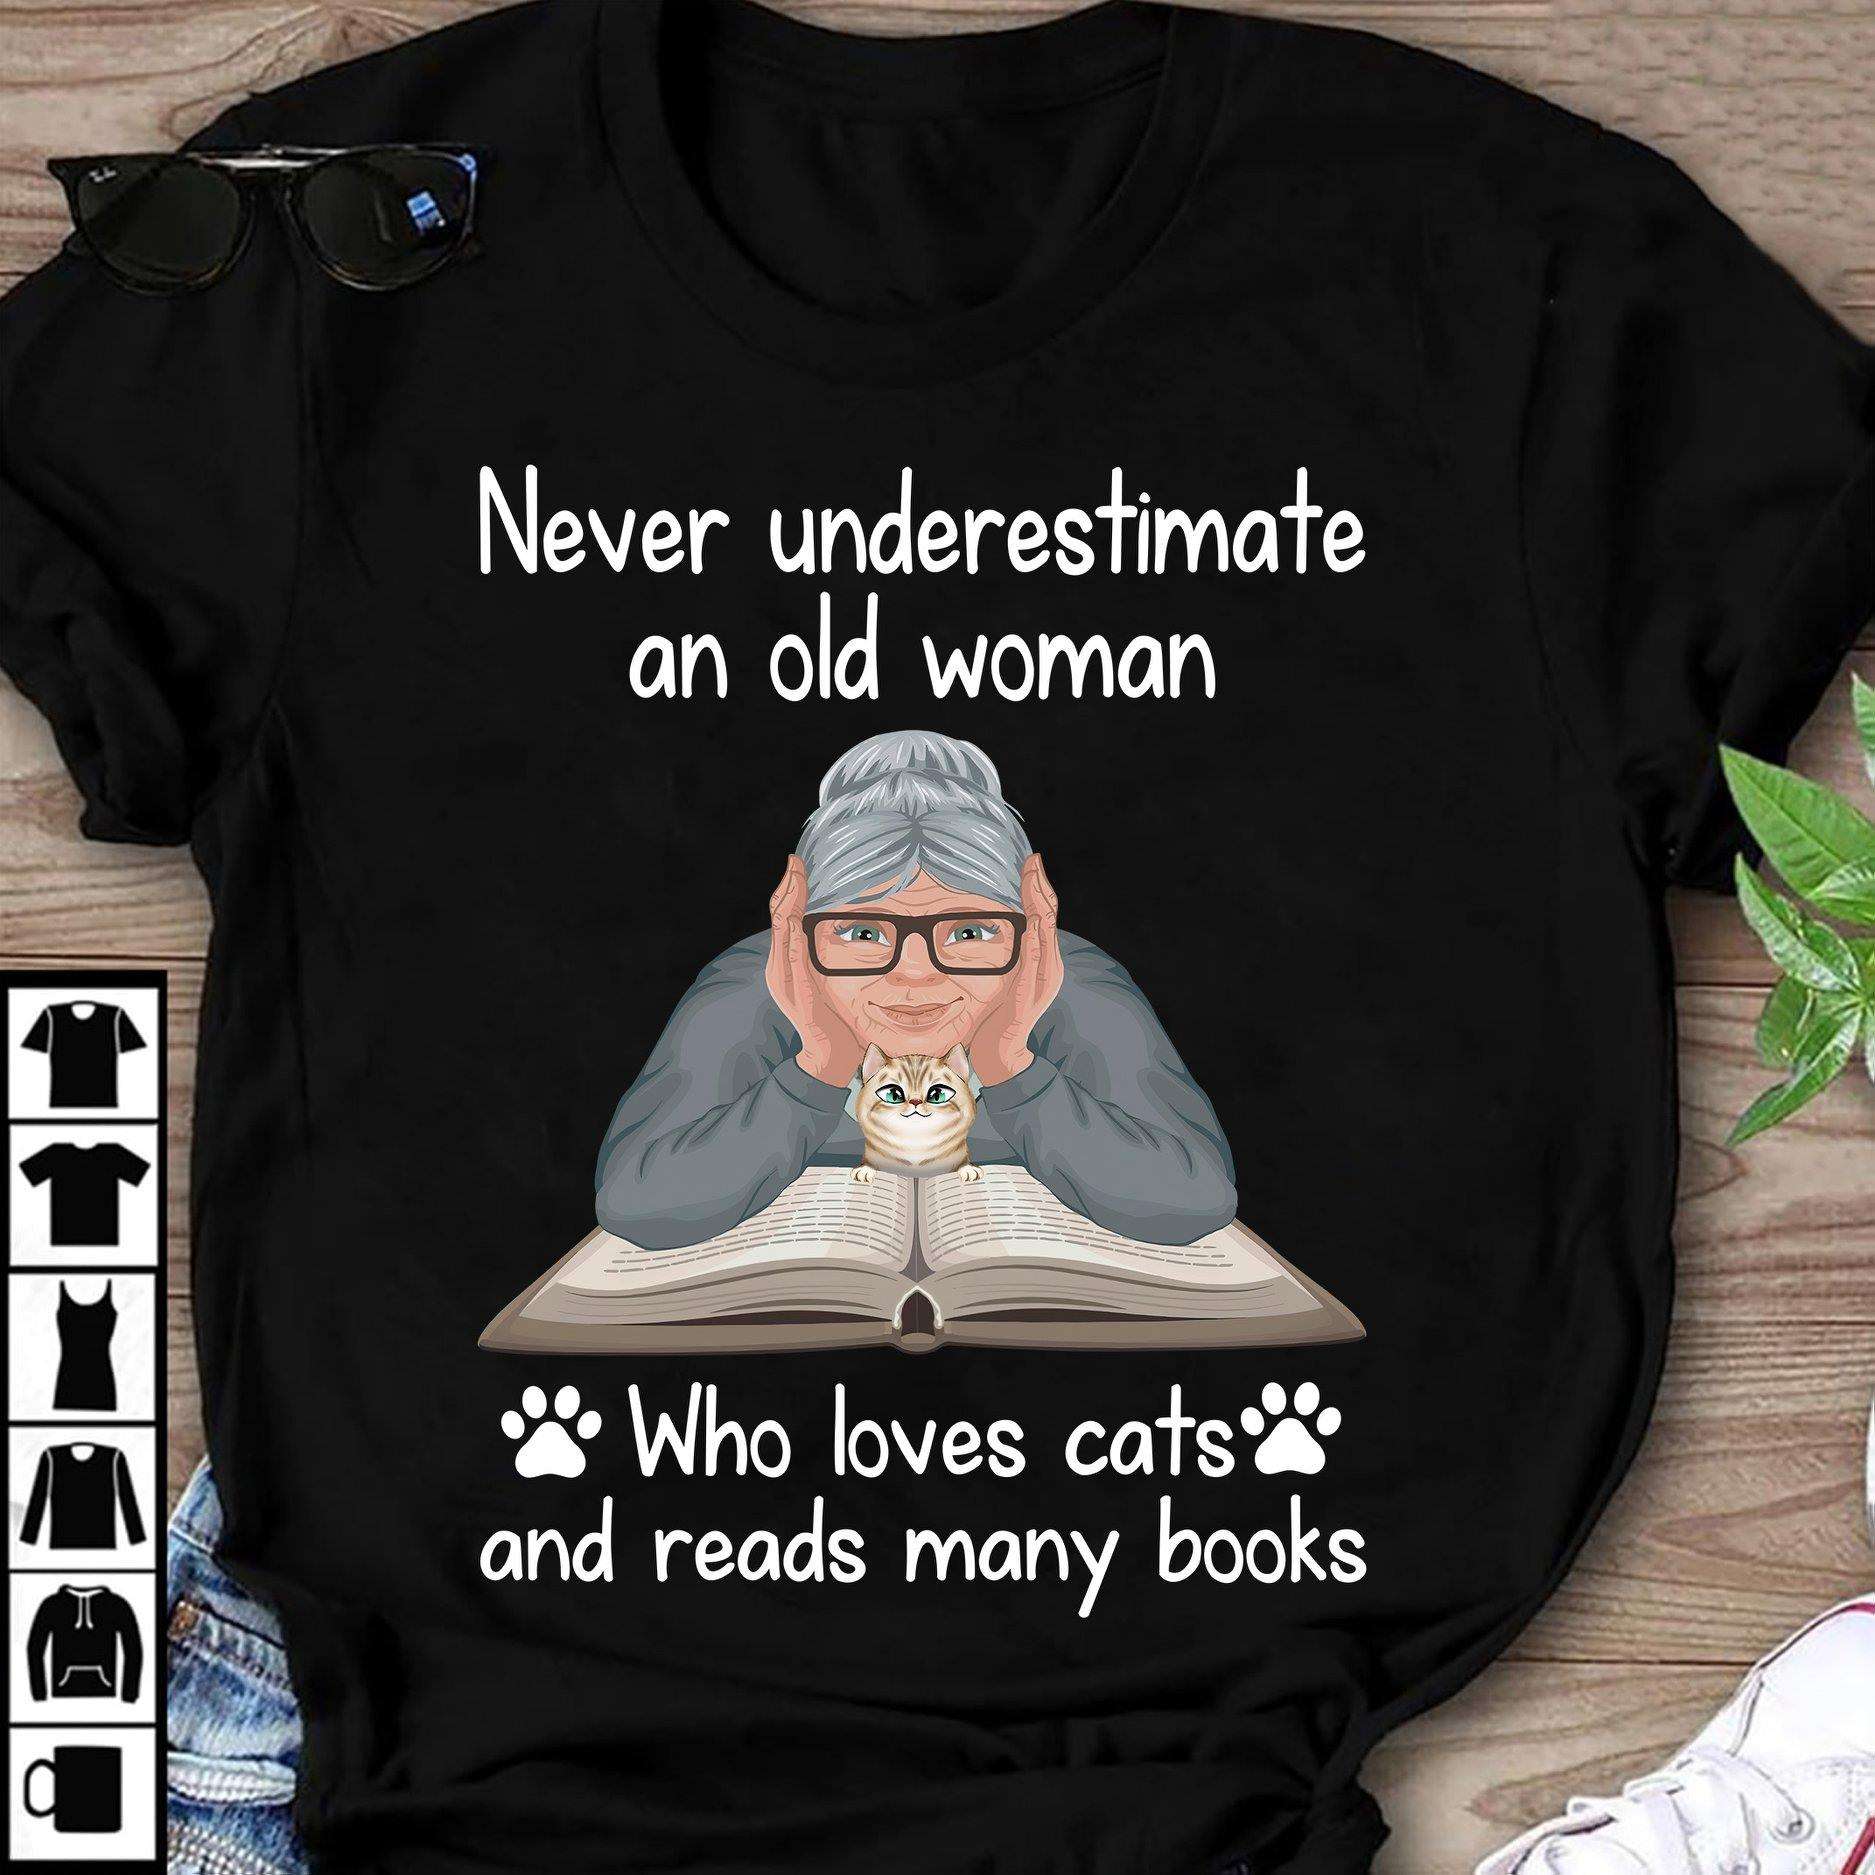 Never underestimate an old woman who loves cats and reads many books - Old woman reading book